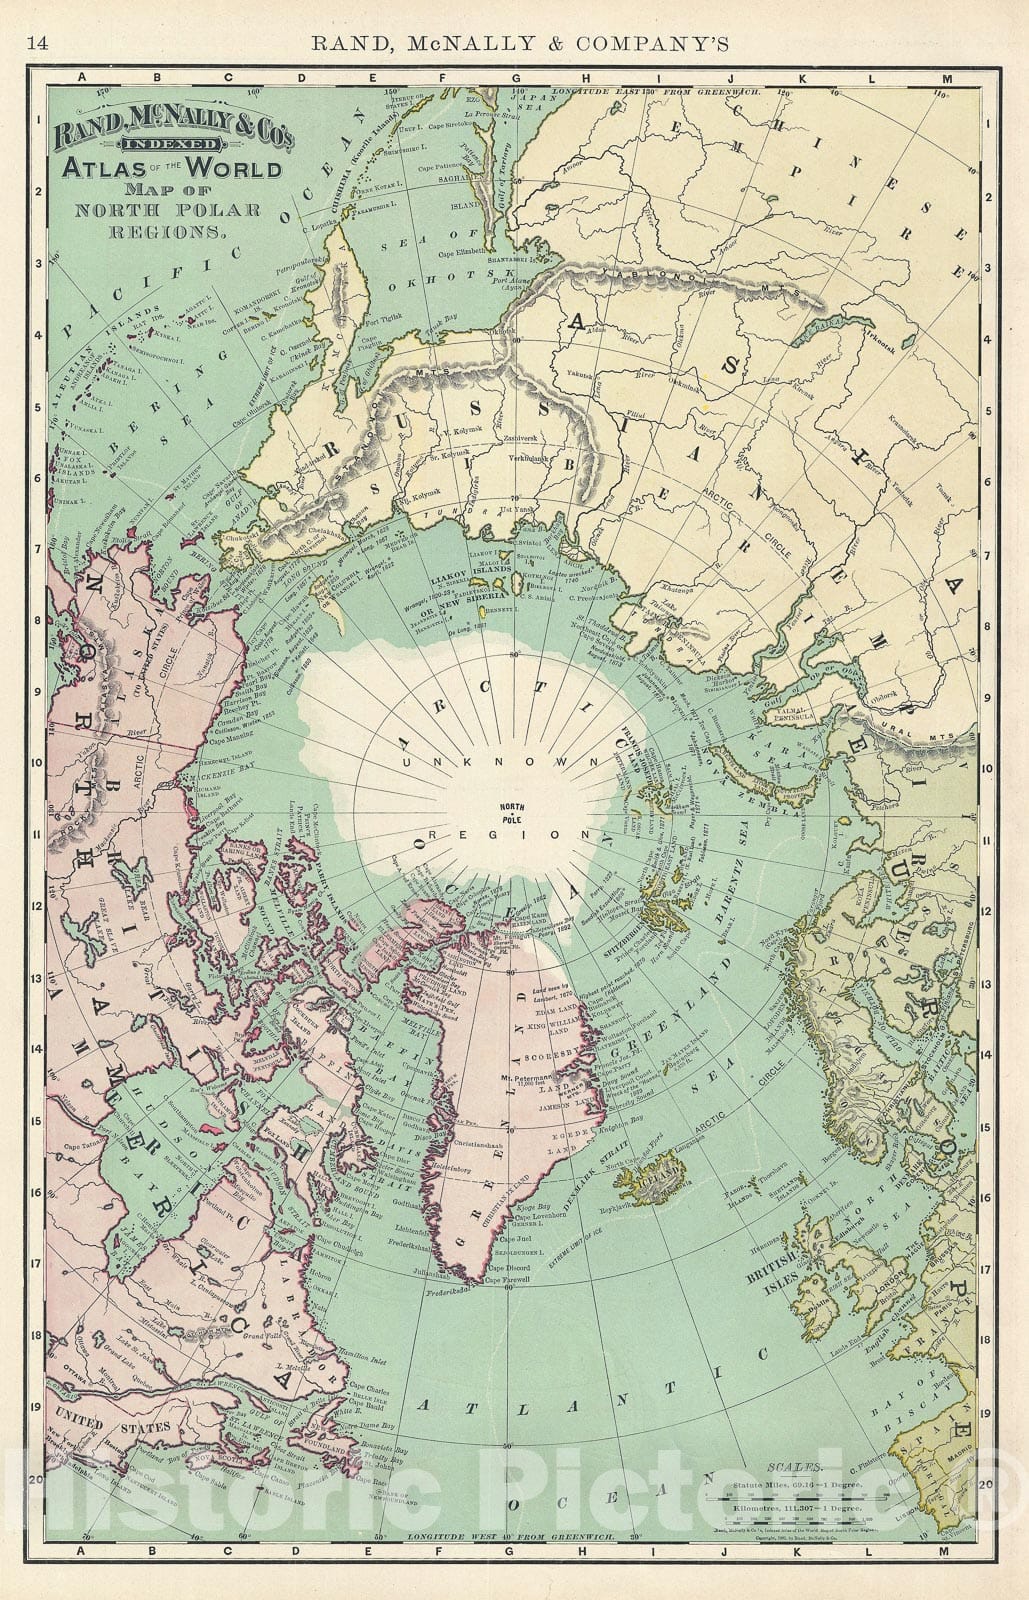 Historic Map : The North Pole or Arctic Regions, Rand McNally, 1892, Vintage Wall Art